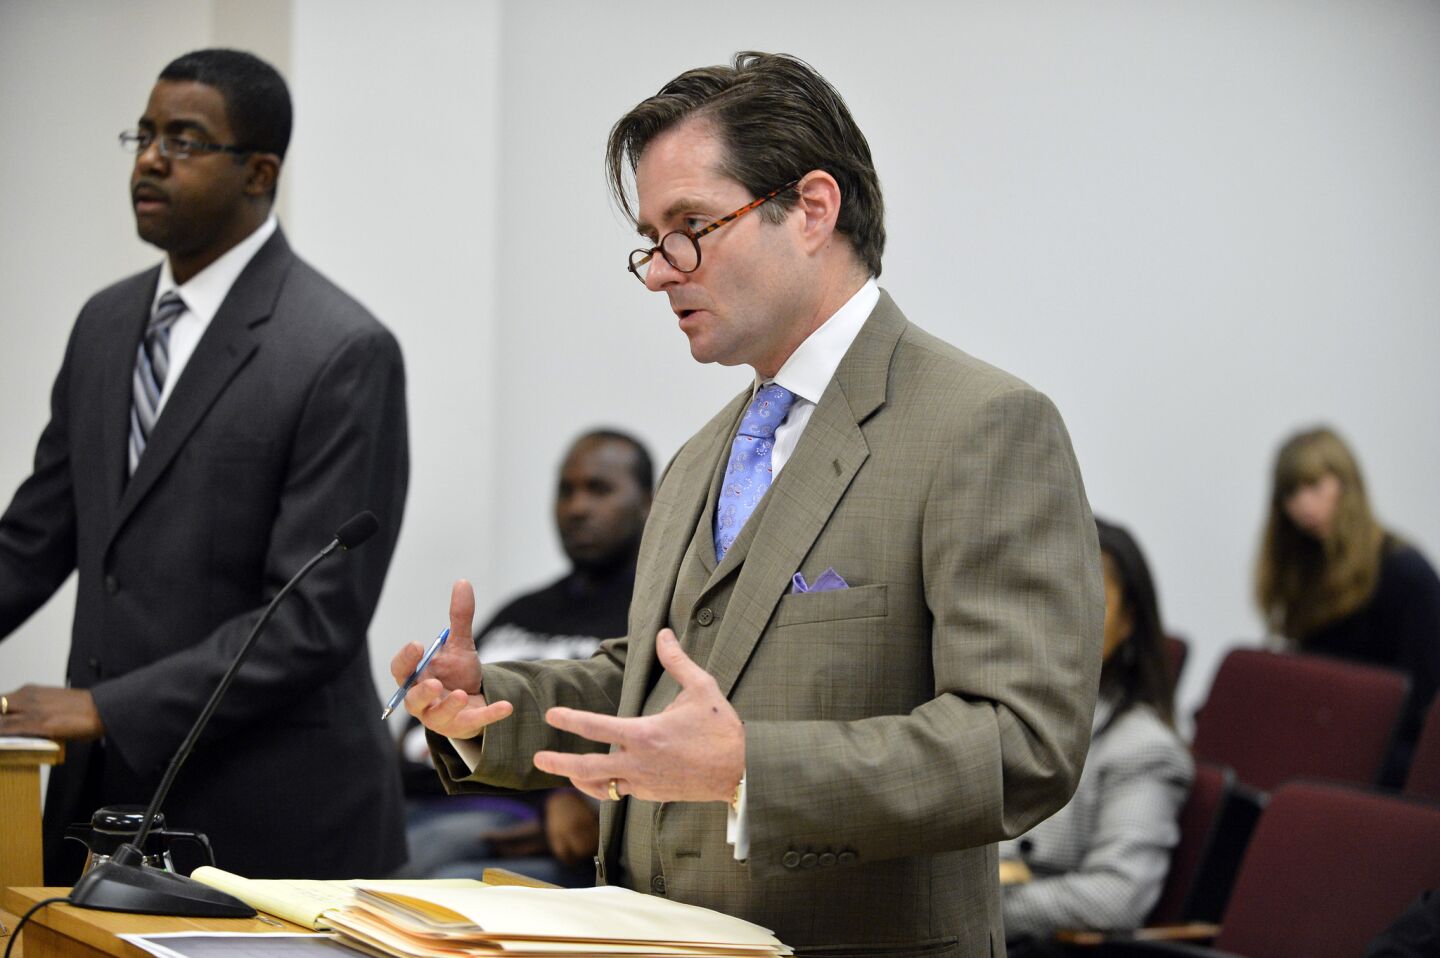 Christopher Dolan, attorney for Nailah Winkfield, mother of Jahi McMath, speaks during a court hearing in Oakland on Dec. 23, 2013.